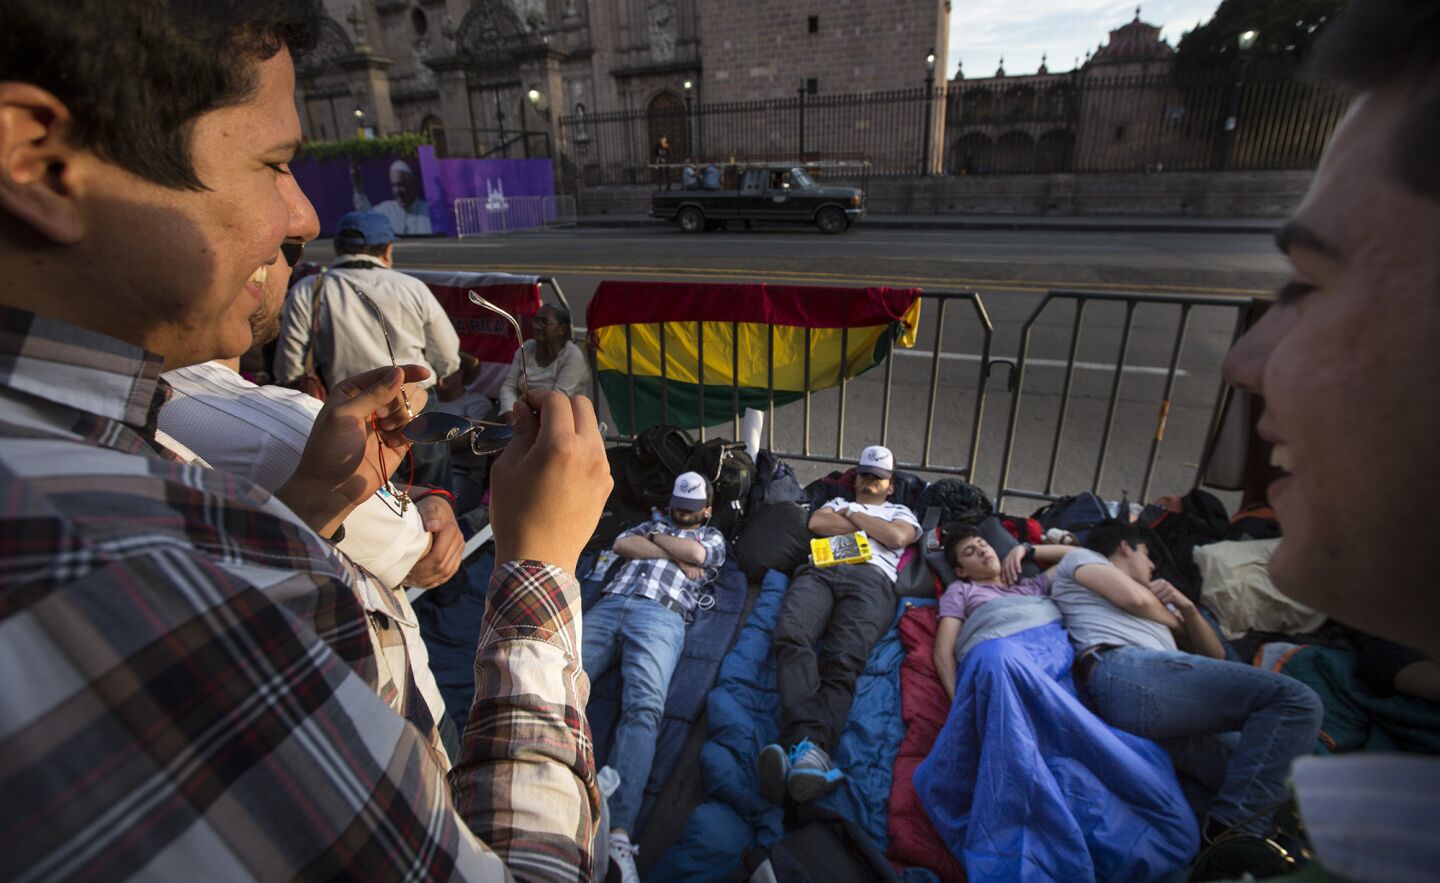 Young men are camped out across the street from the Morelia Cathedral as preparations continue for Pope Francis' arrival in Morelia, Michoacan.